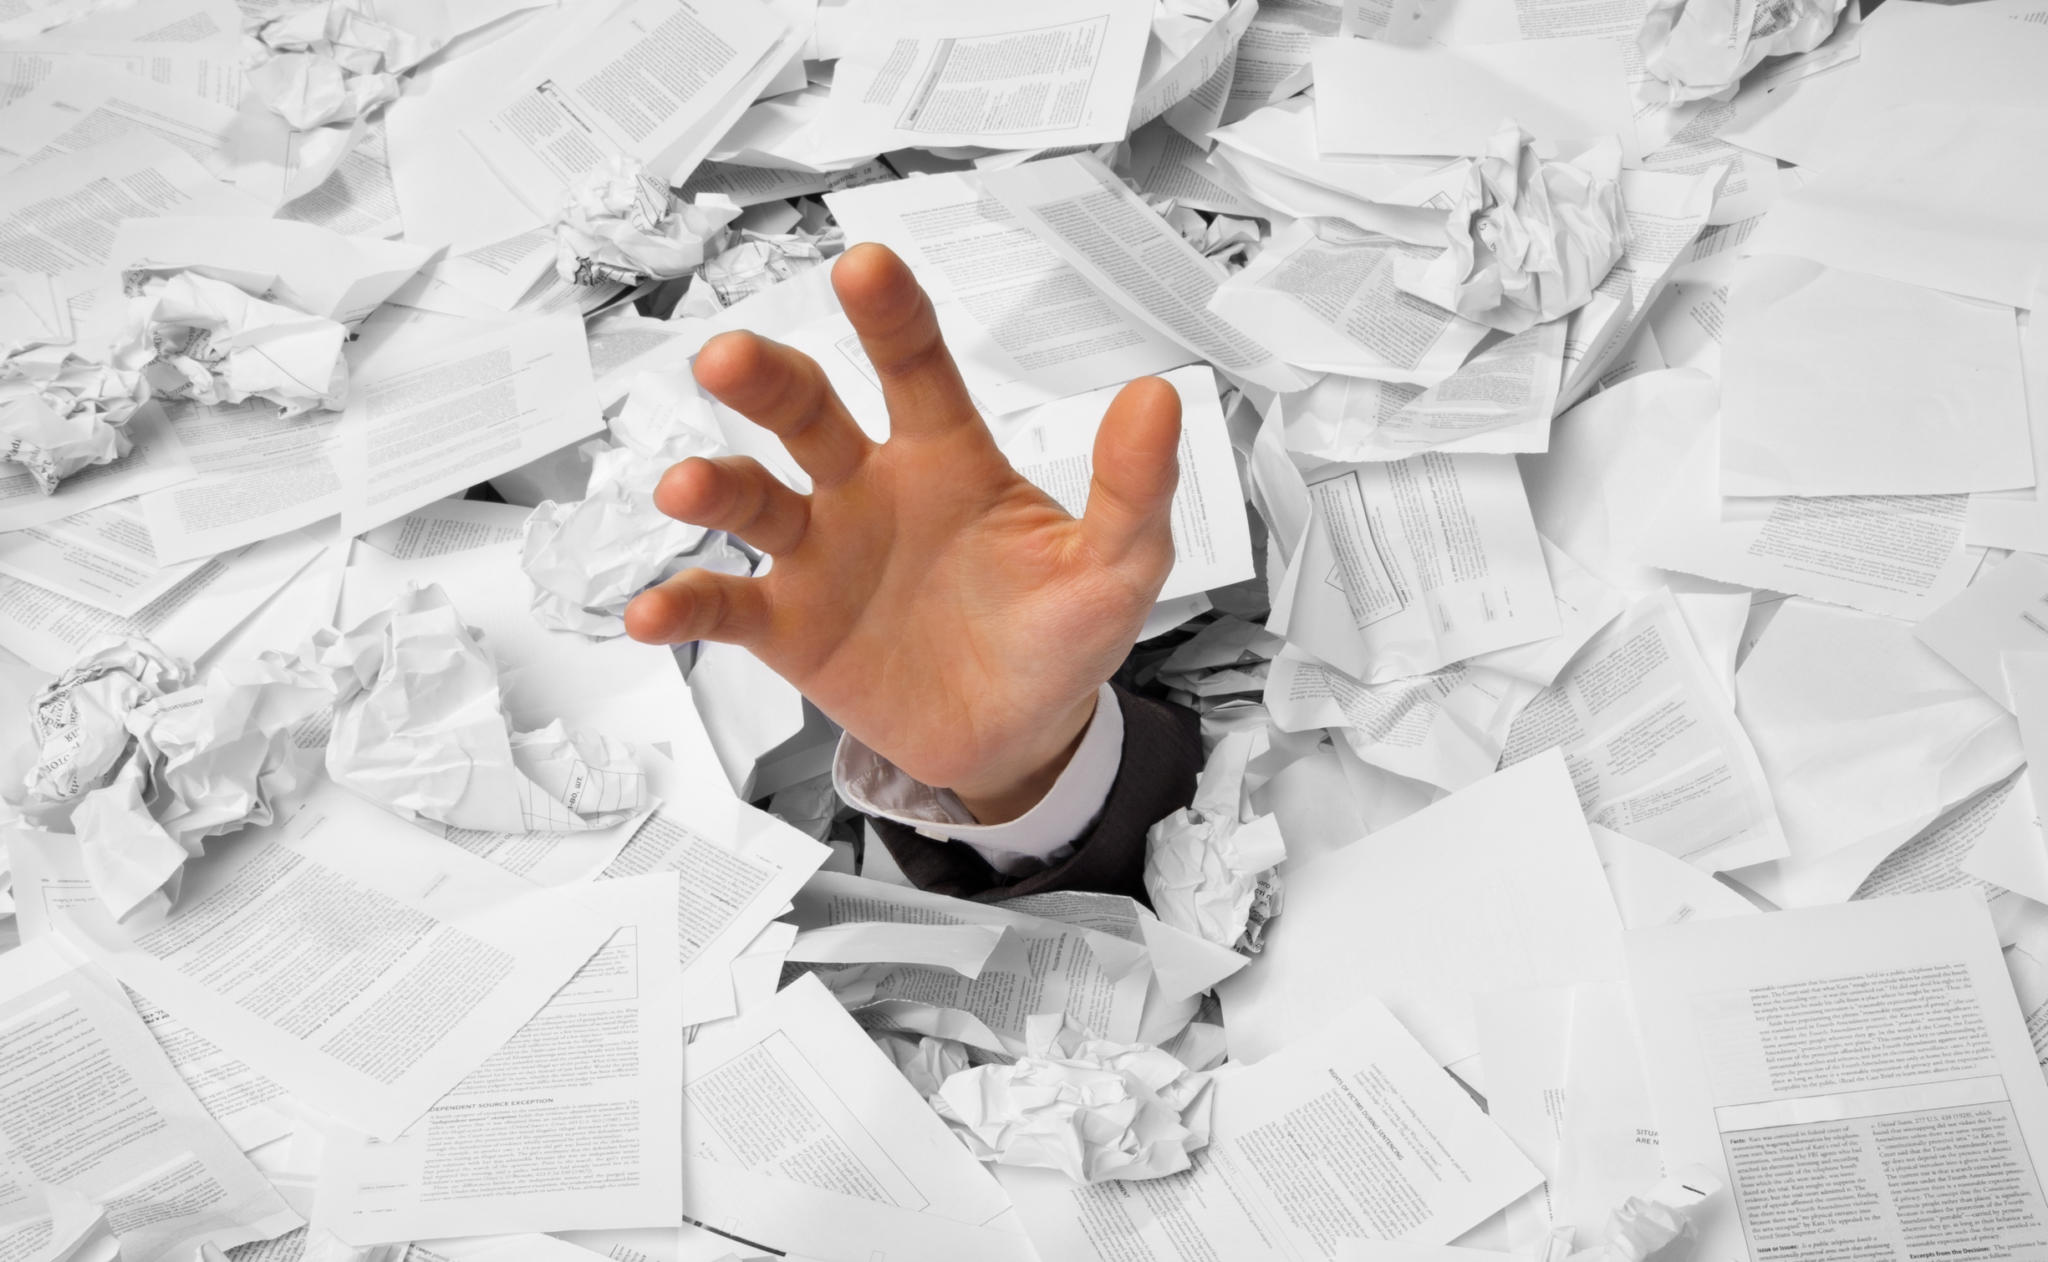 Recruiter's Hand Reaching Through A Pile of Resumes